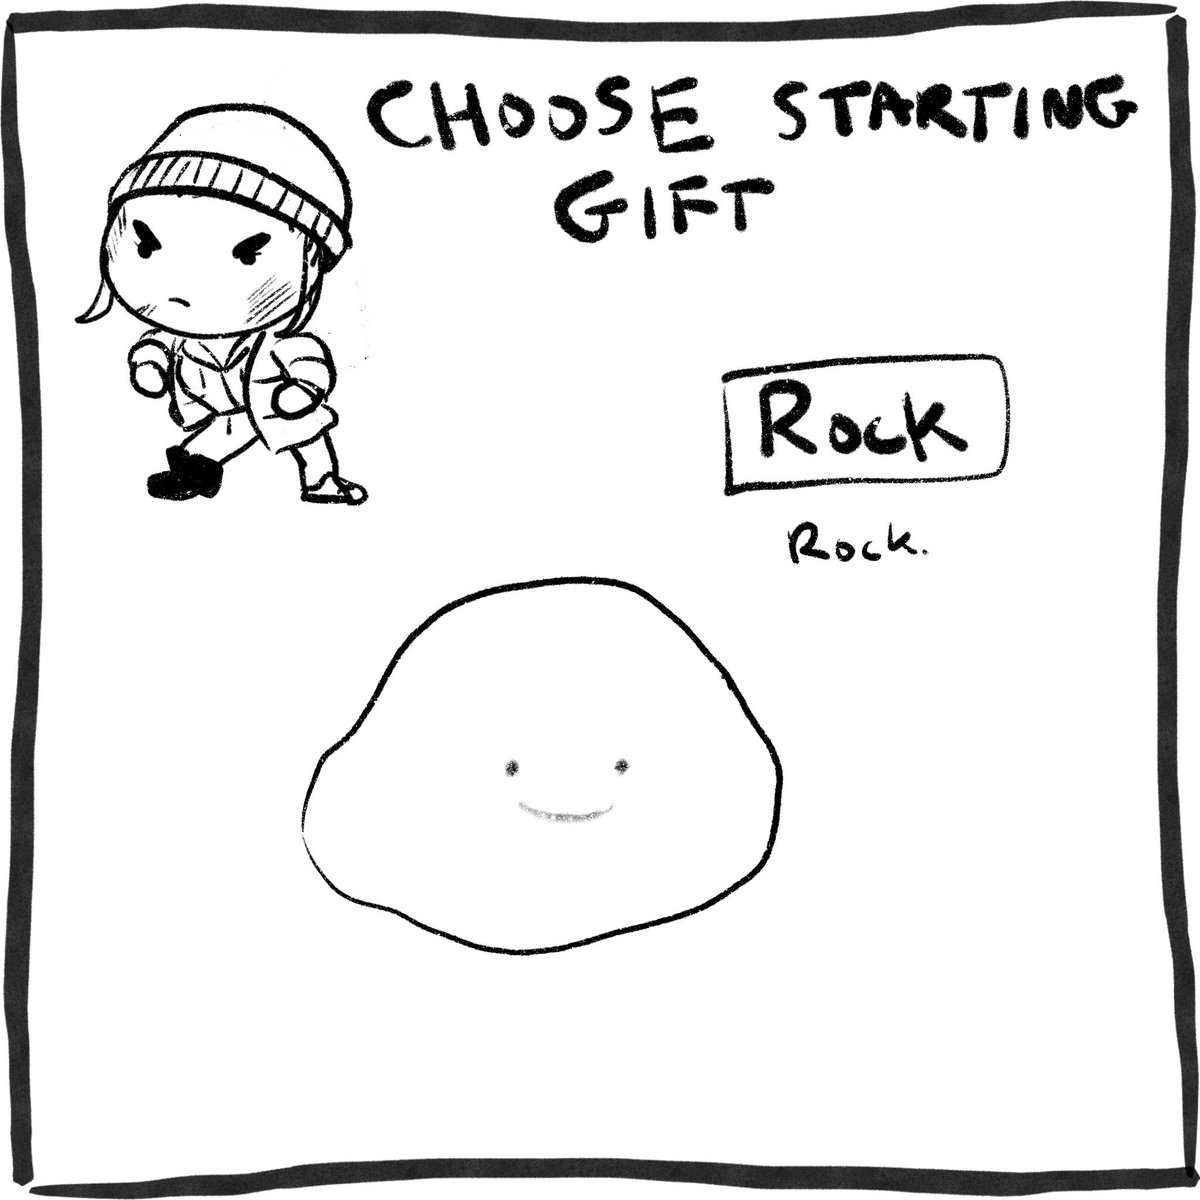 Vote split so I'm choosing hobo from the tie. Choose your starting gift! This item will help you on your adventure.

Vote below ⬇️ https://t.co/w1it3WJDqh 